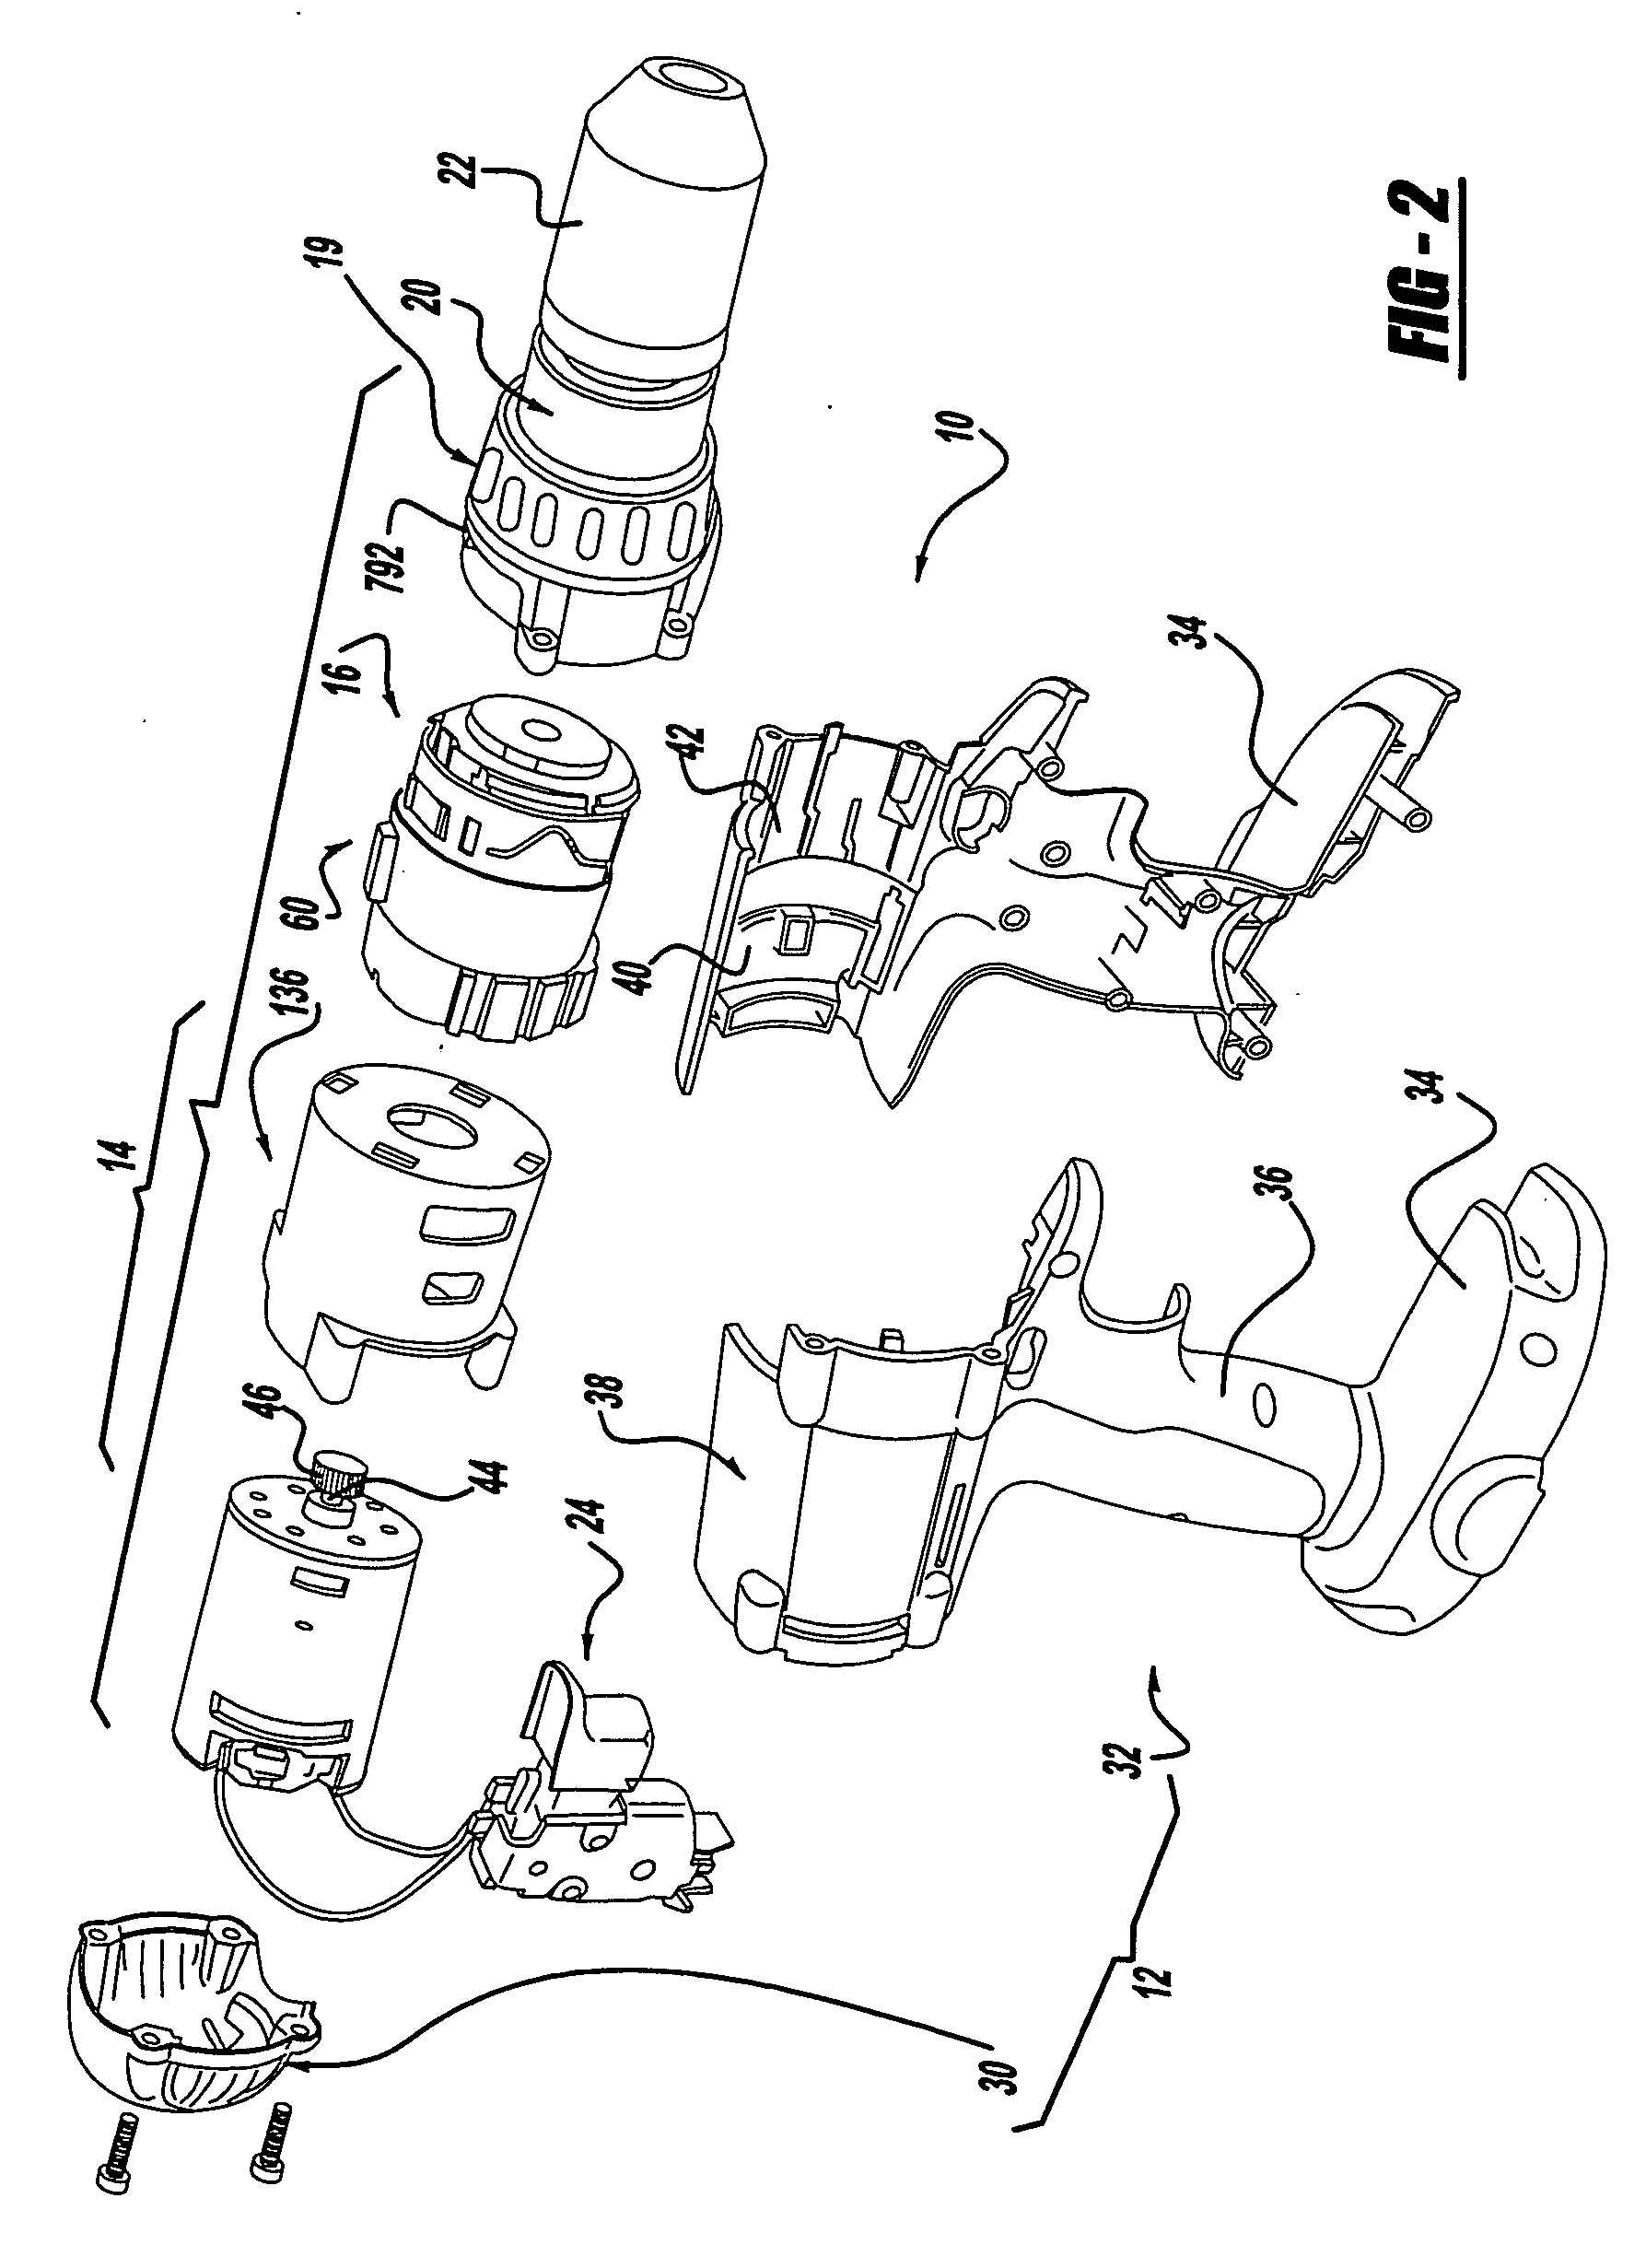 Hammer drill with a mode changeover mechanism